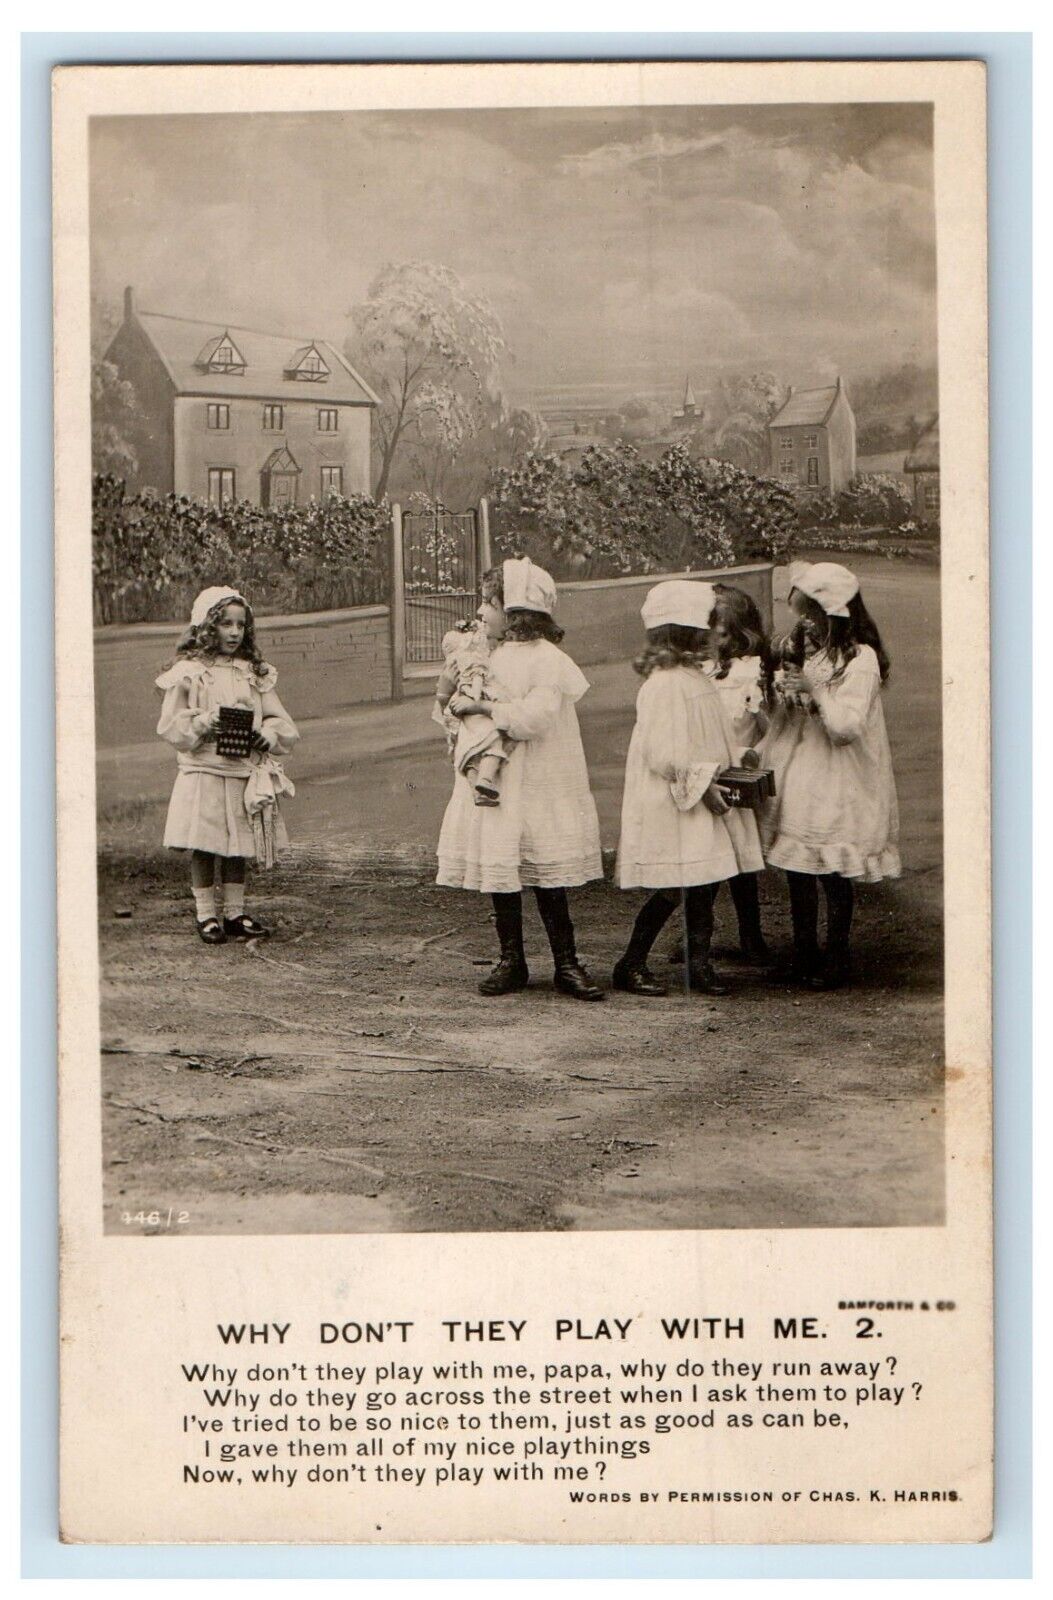 c1905 Girls Childrens Playing Why Don't They Play With Me RPPC Photo Postcard